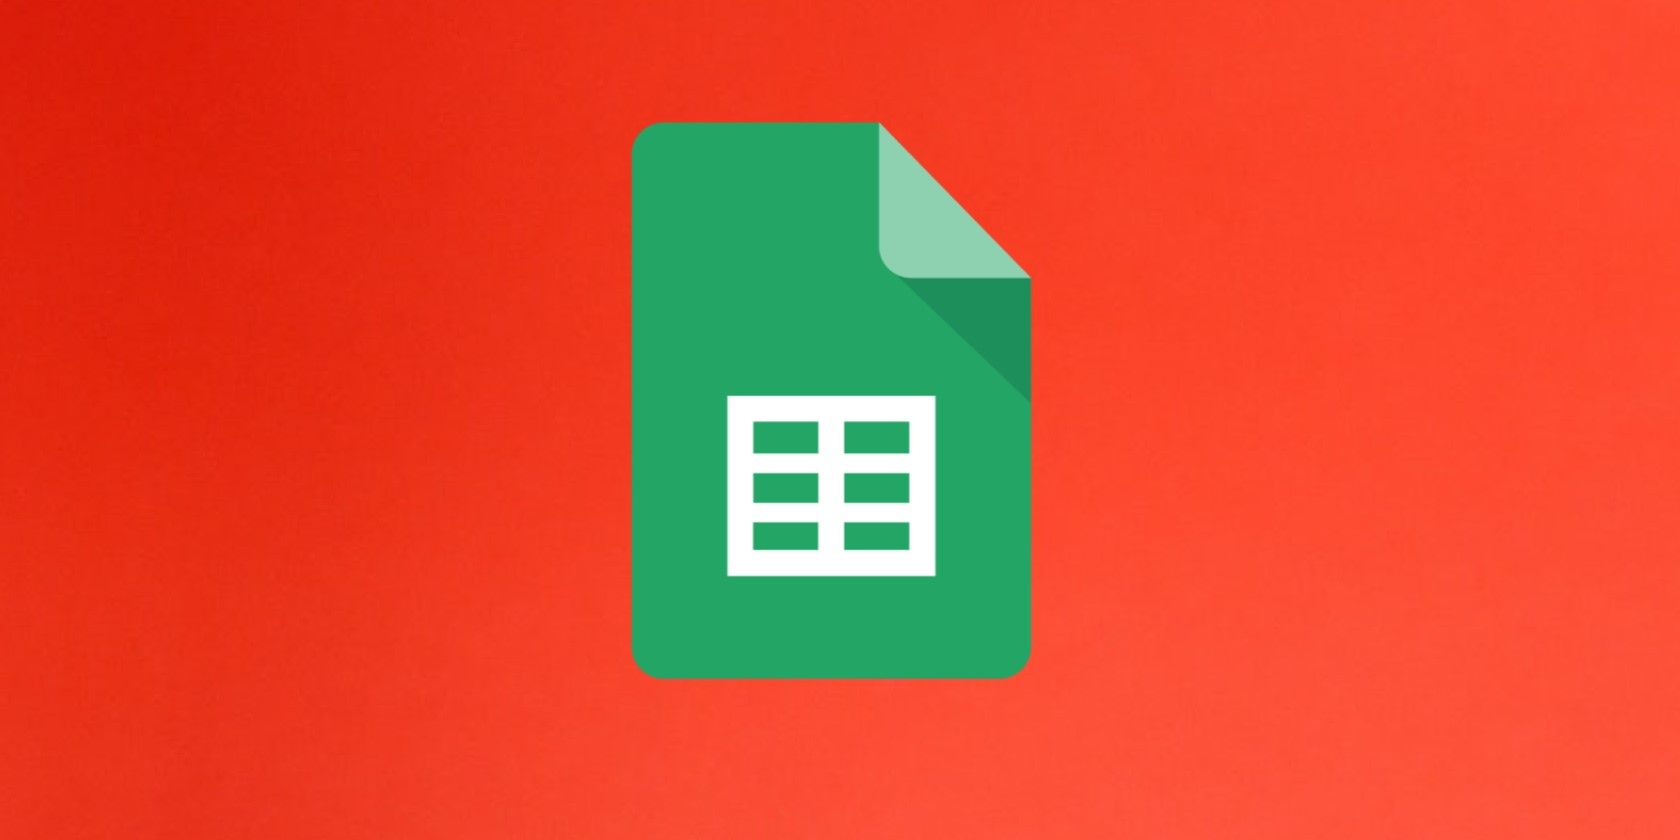 Google Sheets Logo Floating over a red background